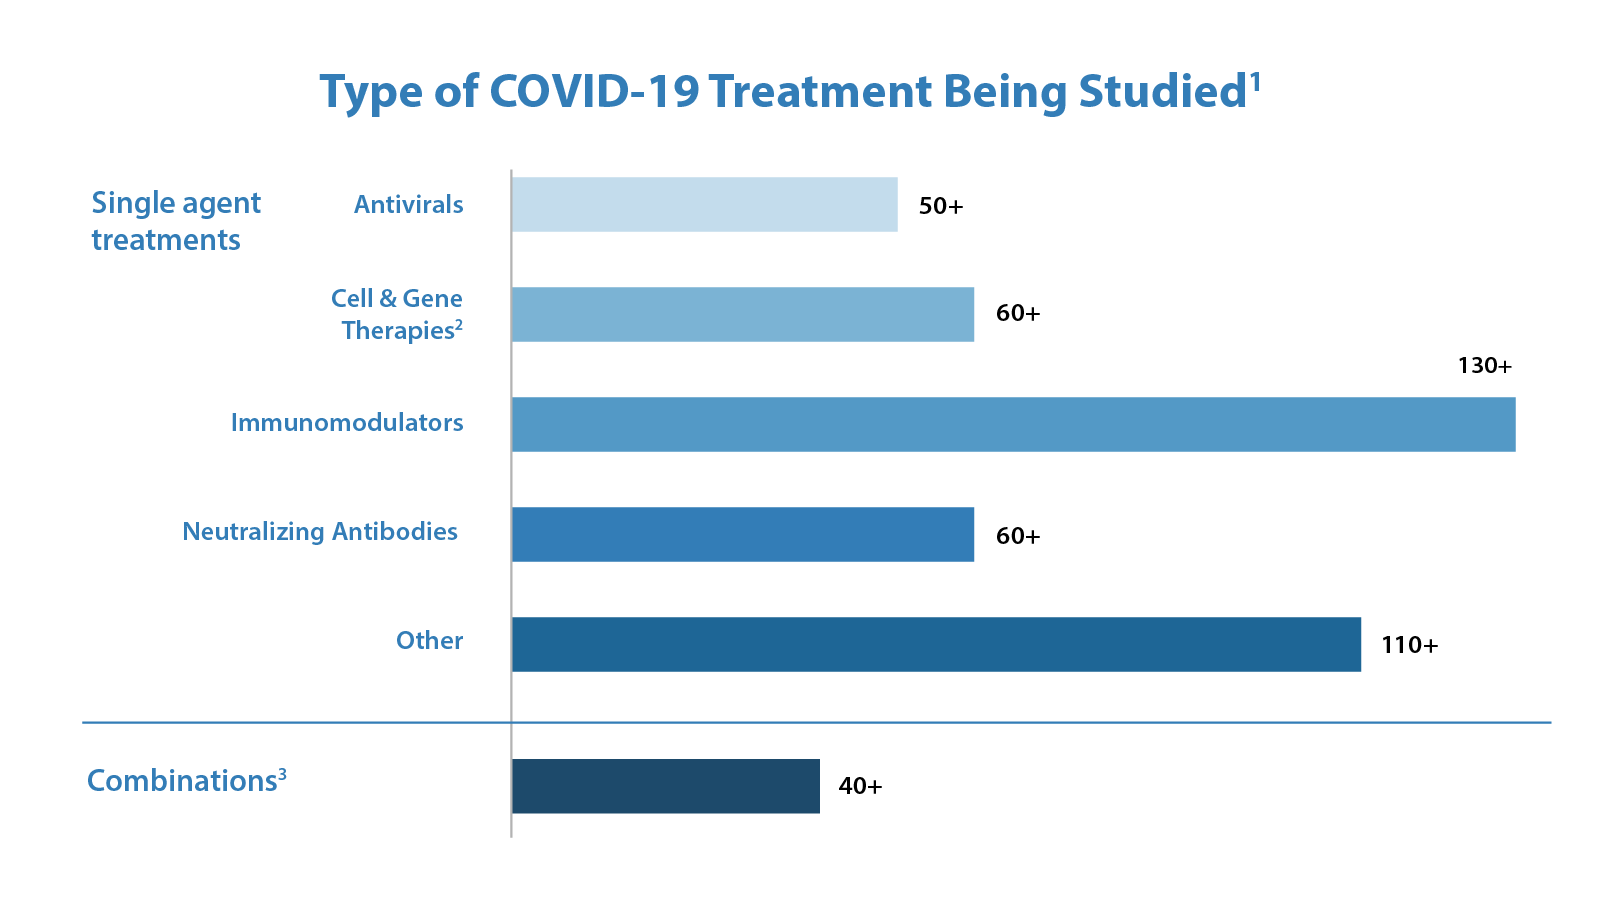 Type of COVID-19 Treatment Being Studied. Single agent treatments: Antivirals 50+; Cell & Gene.  Combinations 40+ Therapies 60+; Immunomodulators 130+; Neutralizing Antibodies 60+; Other 110+